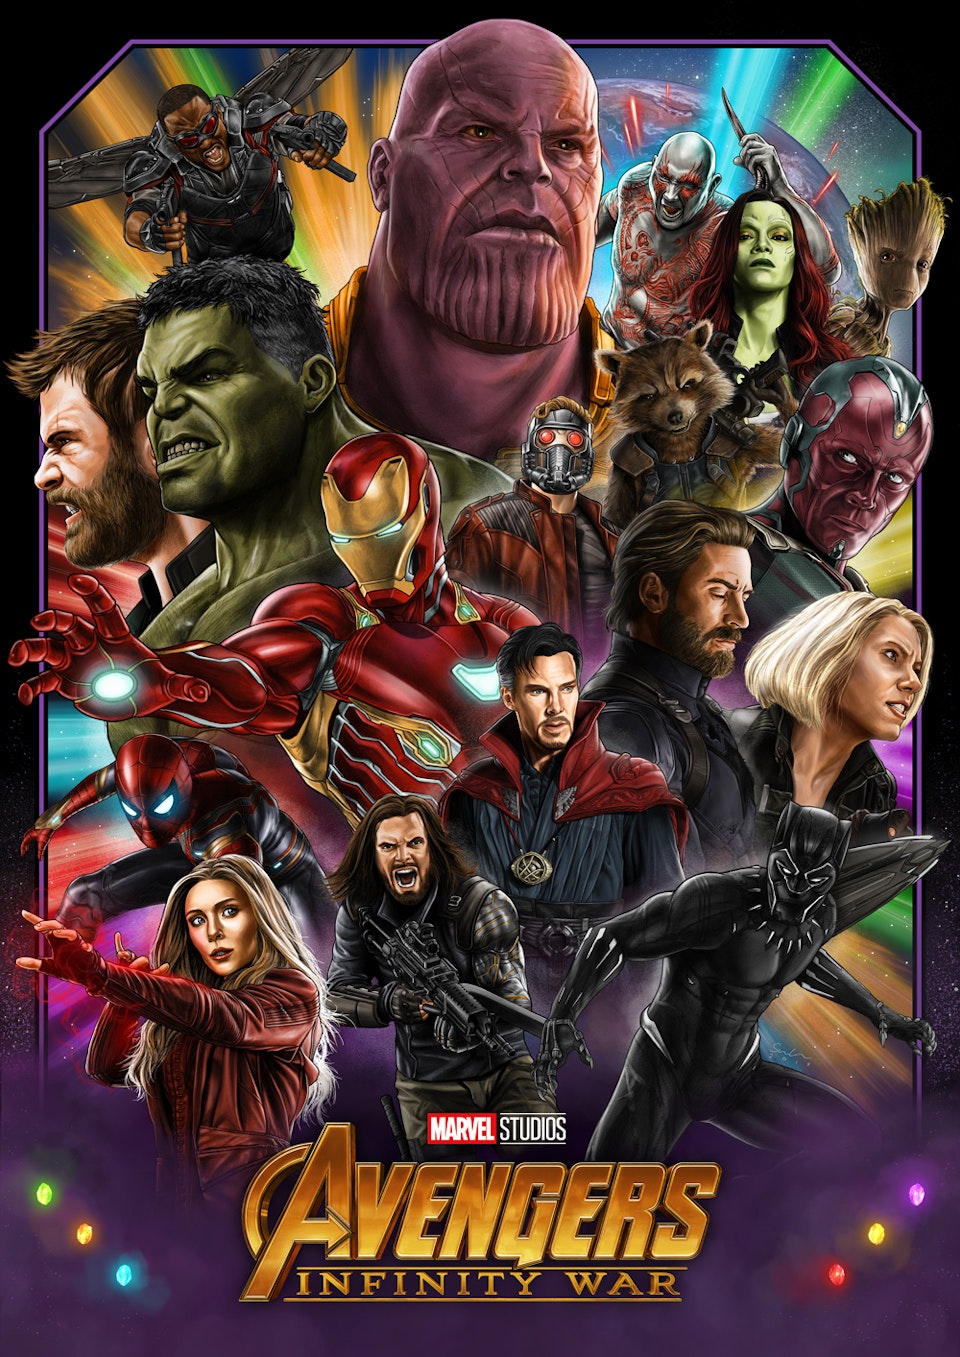 Avengers Infinity War - Infinity War Poster 

Ink on bristol board, assembled and coloured in Adobe Photoshop.

Completed in early 2019, this was my first ever full poster illustration. I learned an insurmountable amount doing this, as would be expected on my first foray into this particular type of art. That said I was surprised quite how much I learned from making this. Some of the biggest lessons I learned were what <b>not</b> to do when making a poster, specifically a large scale collage style piece. It was a very valuable experience.

Speaking of what not to do, the piece was made by hand drawing 18 individual illustrations for each of the characters in meticulous detail. My main tools were my trusty 0.5 Pentel Sharplet pencil which I've used for years, and a combination of various grey-toned ProMarkers. This was a very long way of doing things, as I'd be spending hours drawing characters where the majority of the drawing would be covered up or obscured in the finished piece. The benefit of this however was being able to make several separate art pieces that I could colour and sell as prints separately, and post to social media to generate interest for the poster. Essentially, I was making 18 character posters simultaniously in what would culminate in one larger group poster - it was a very ambitious project to start out with, but I'm very happy that I pushed myself to do it.